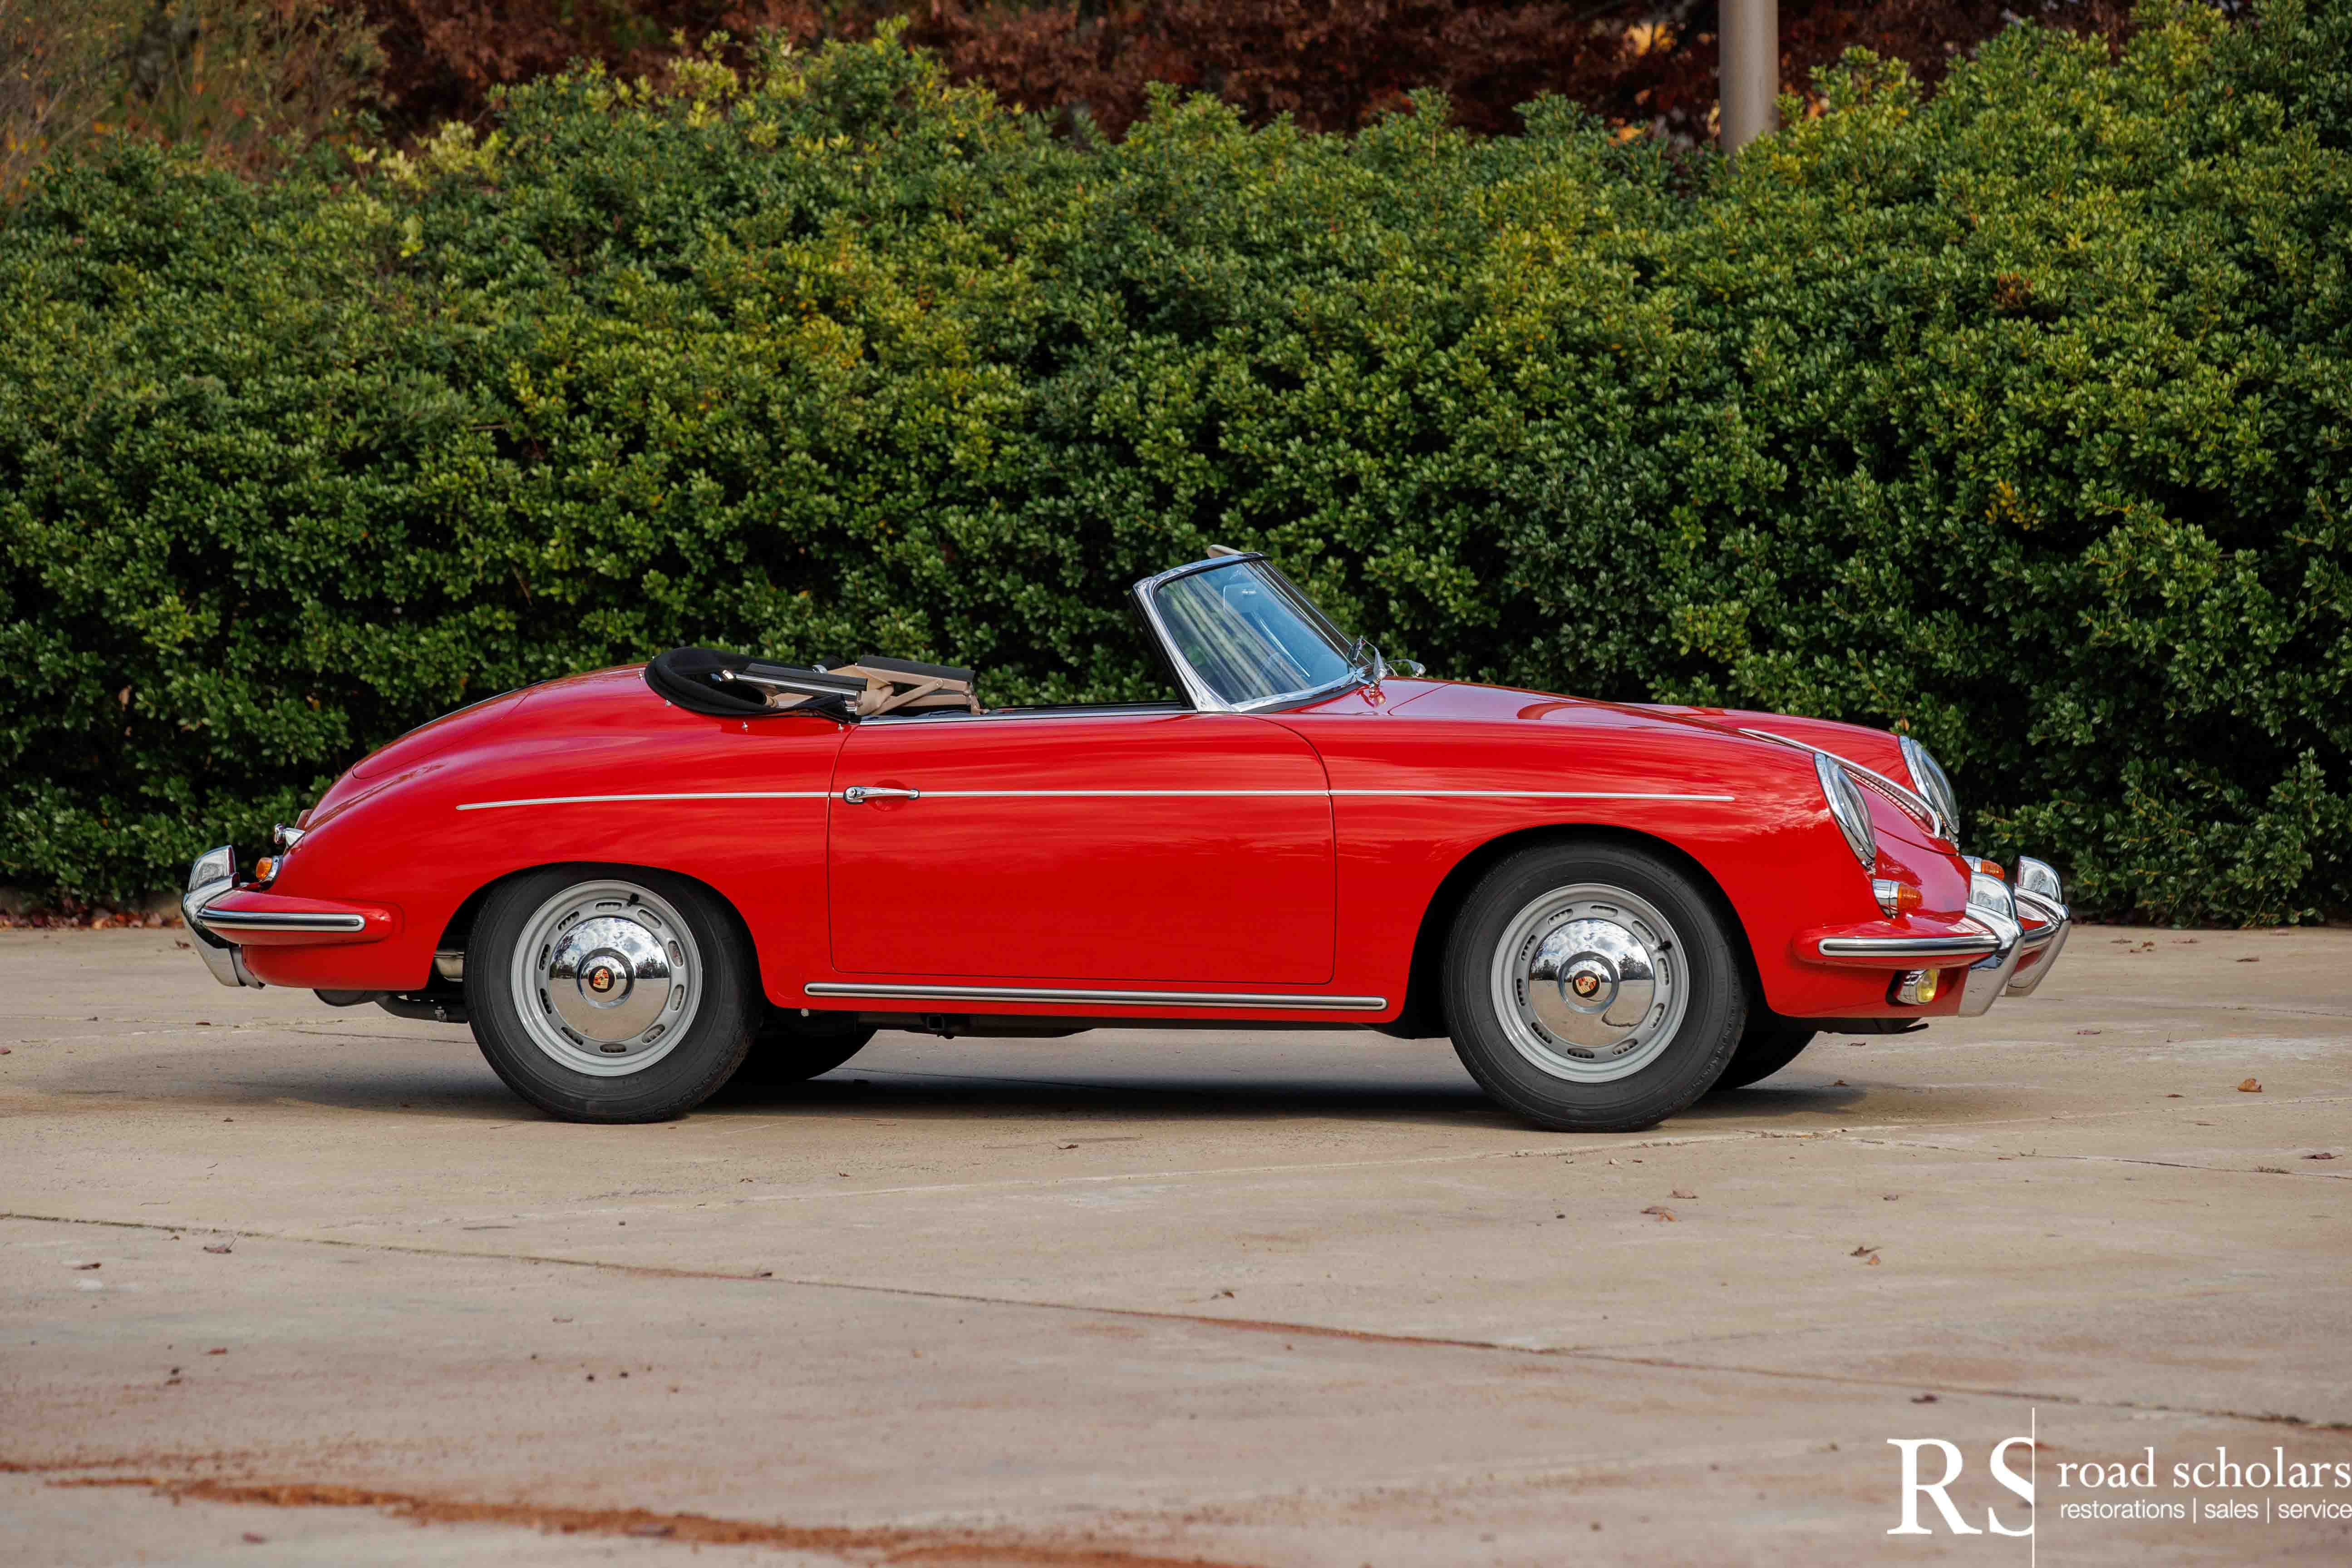 1961 Porsche 356B Super 90 (T5) Roadster chassis 89305 (watermarked)-38